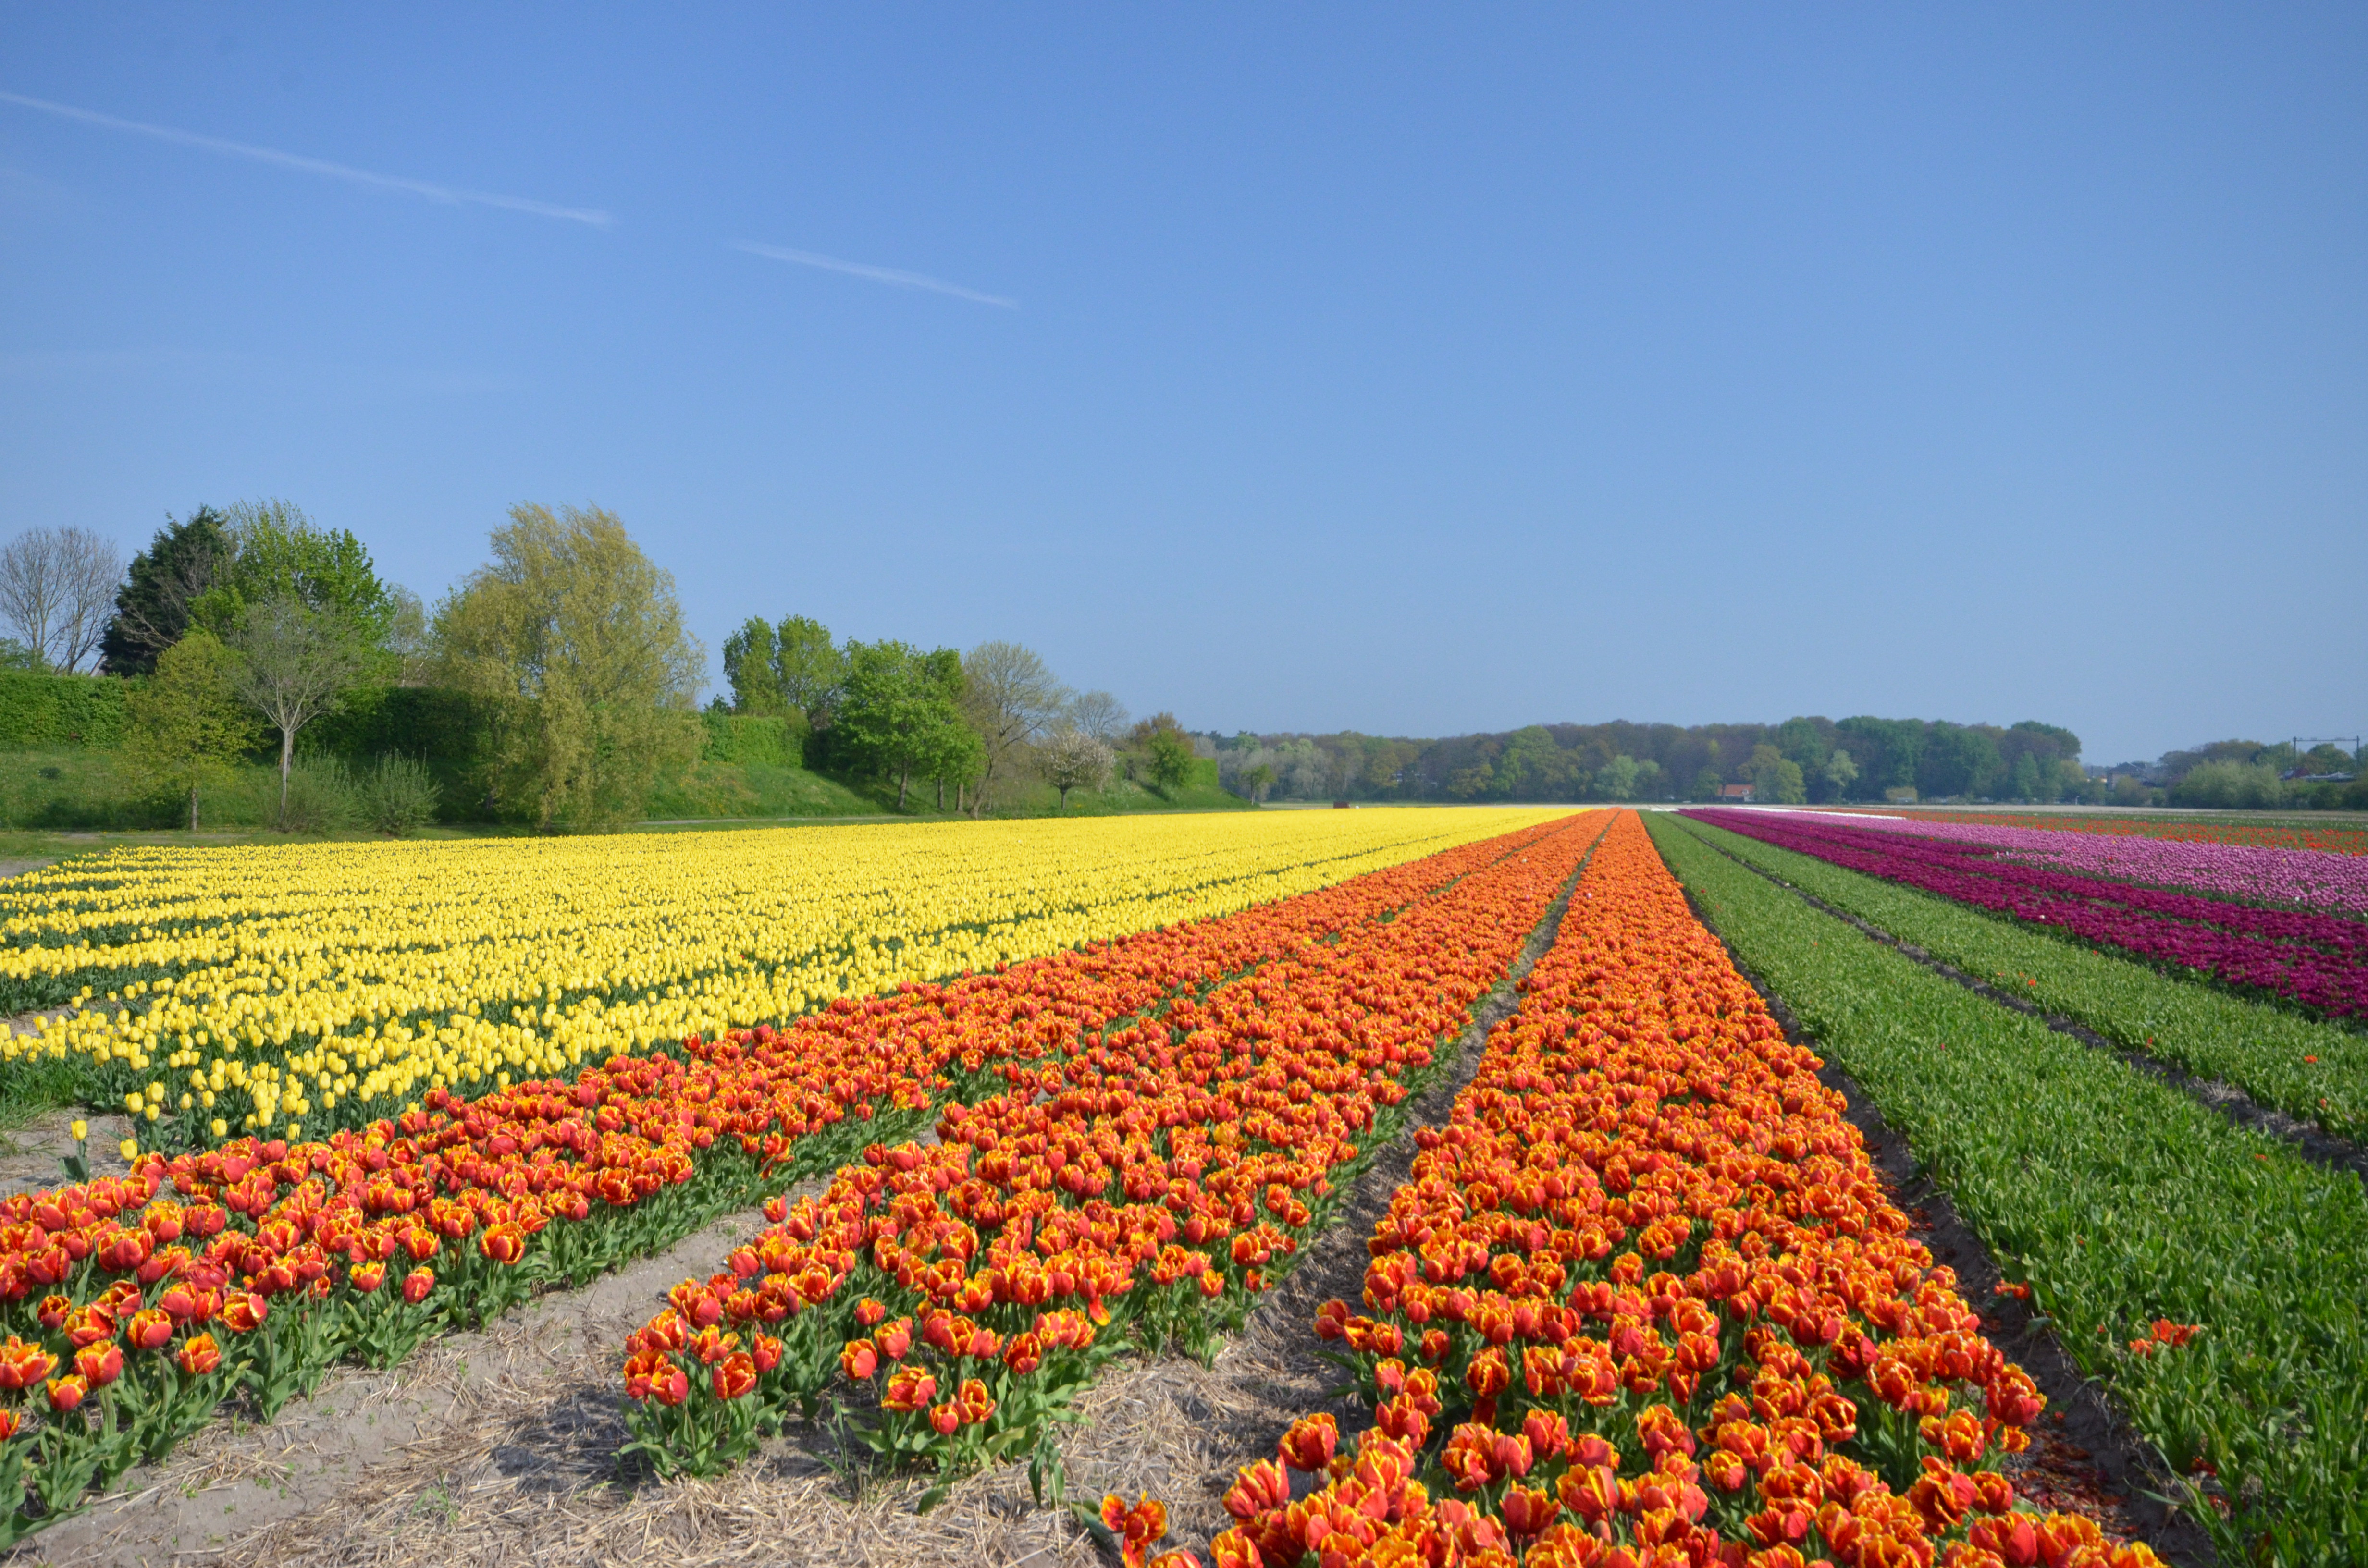 The First bulb field on the way to the Keukenhof